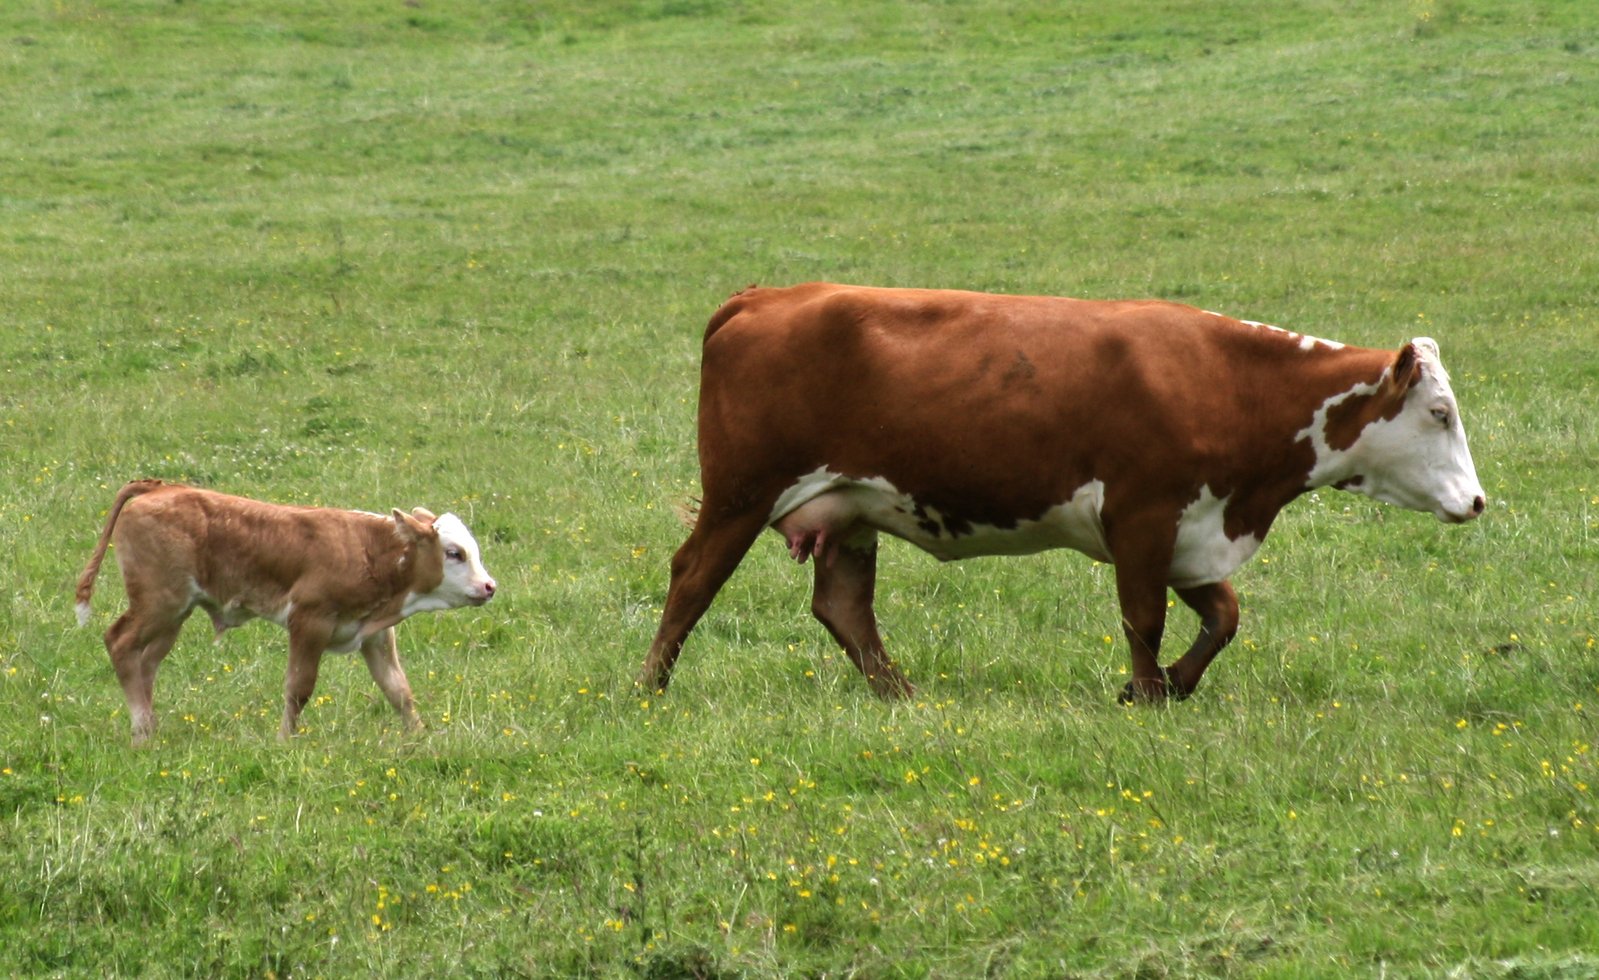 the brown cow is walking next to the bigger cow